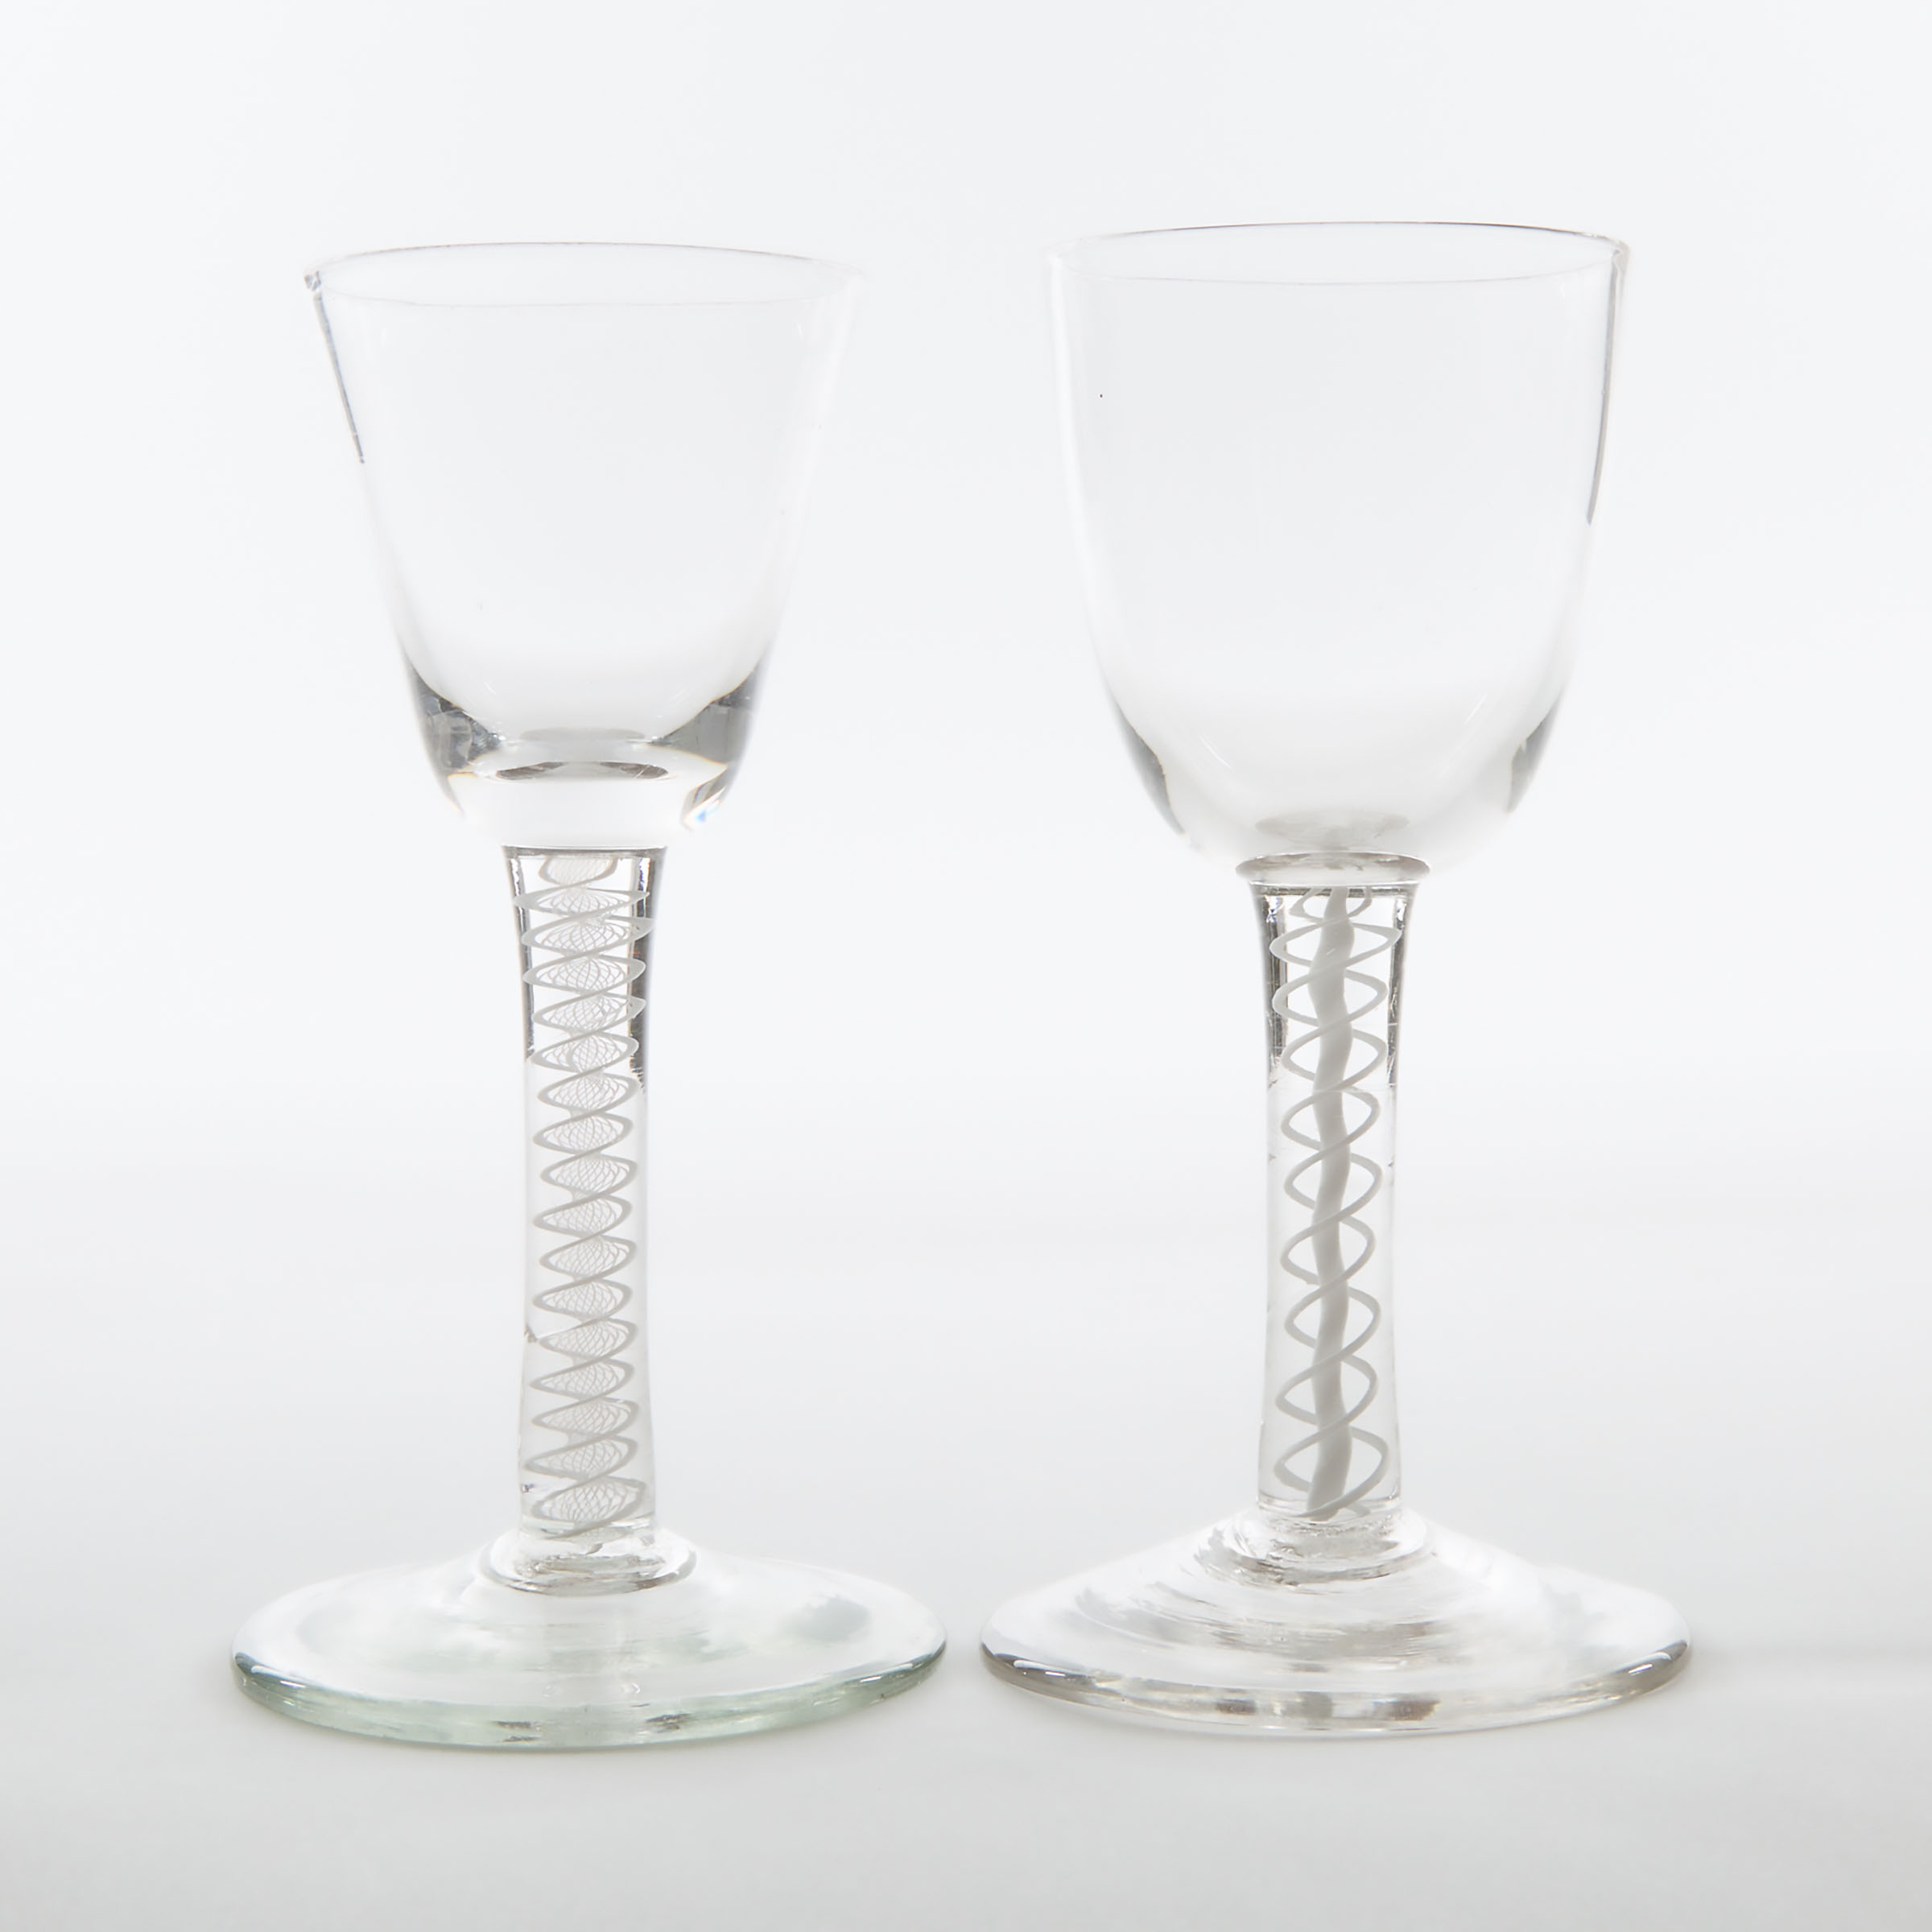 Two English Double Series Opaque Twist Stemmed Wine Glasses, c.1760-80